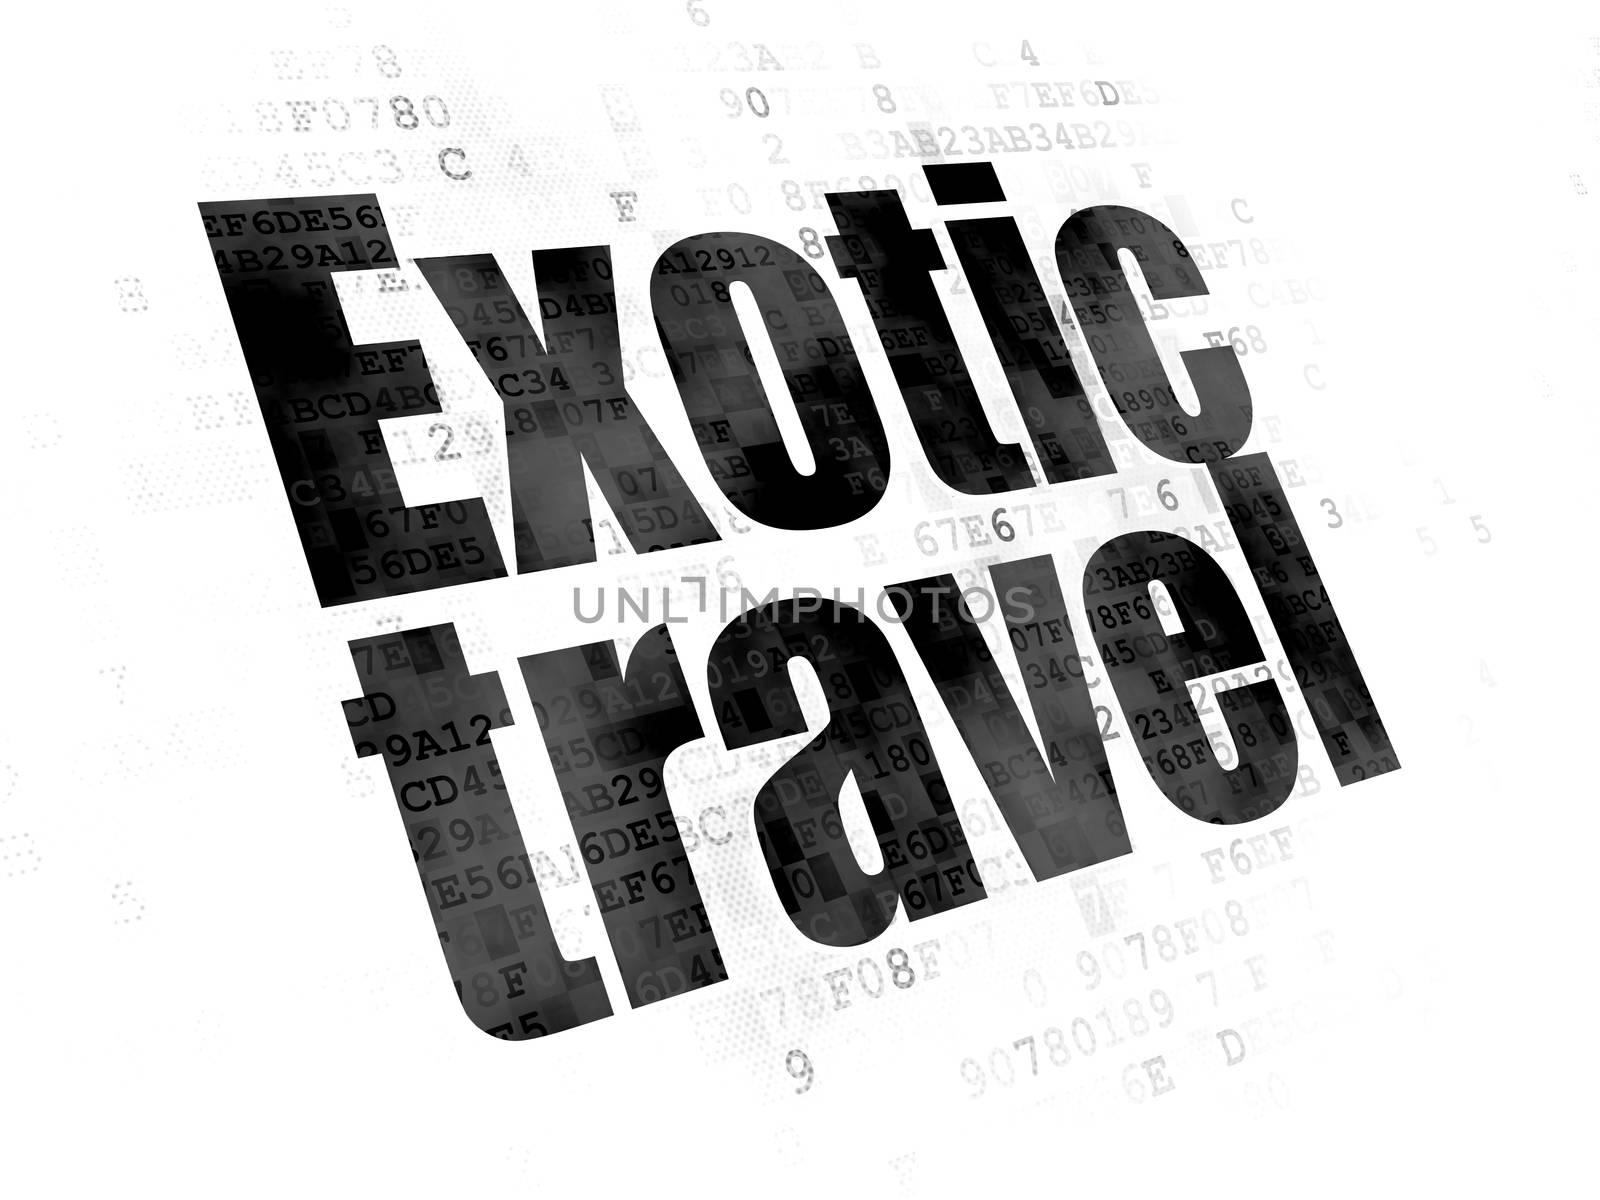 Vacation concept: Pixelated black text Exotic Travel on Digital background